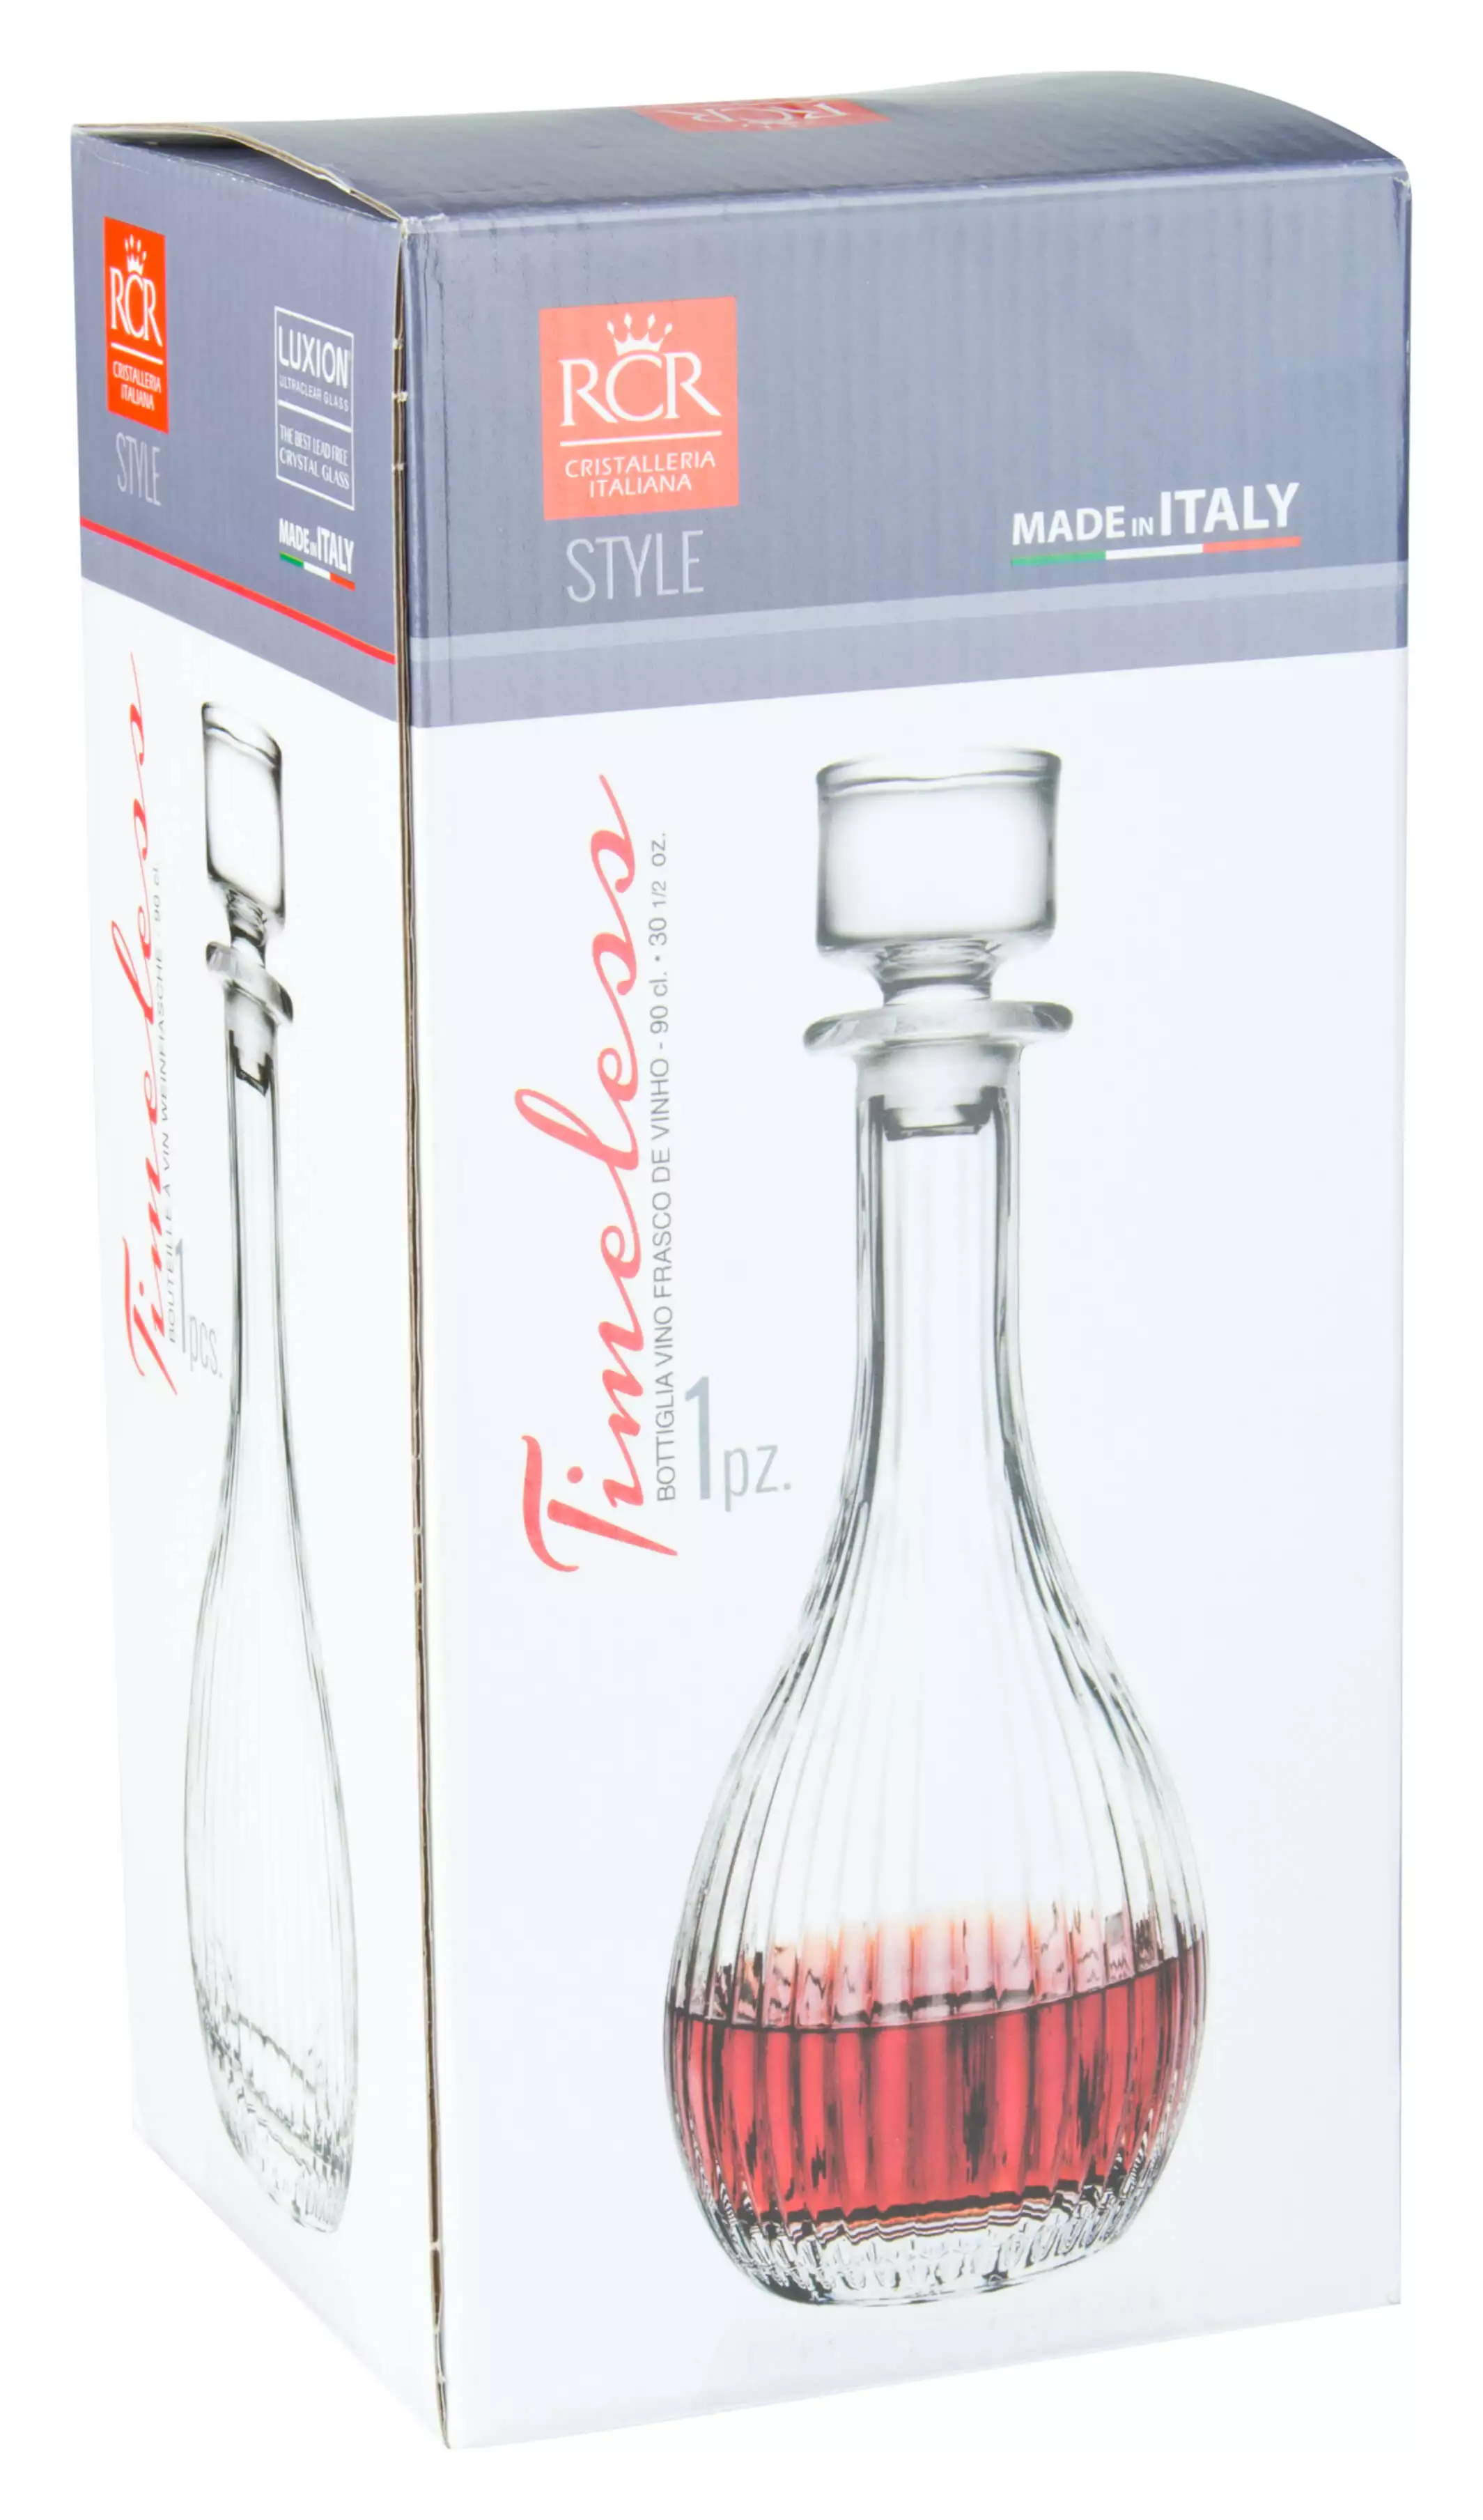 RCR Crystal Glassware Timeless Round Wine Decanter, 90 CL / 900 ML